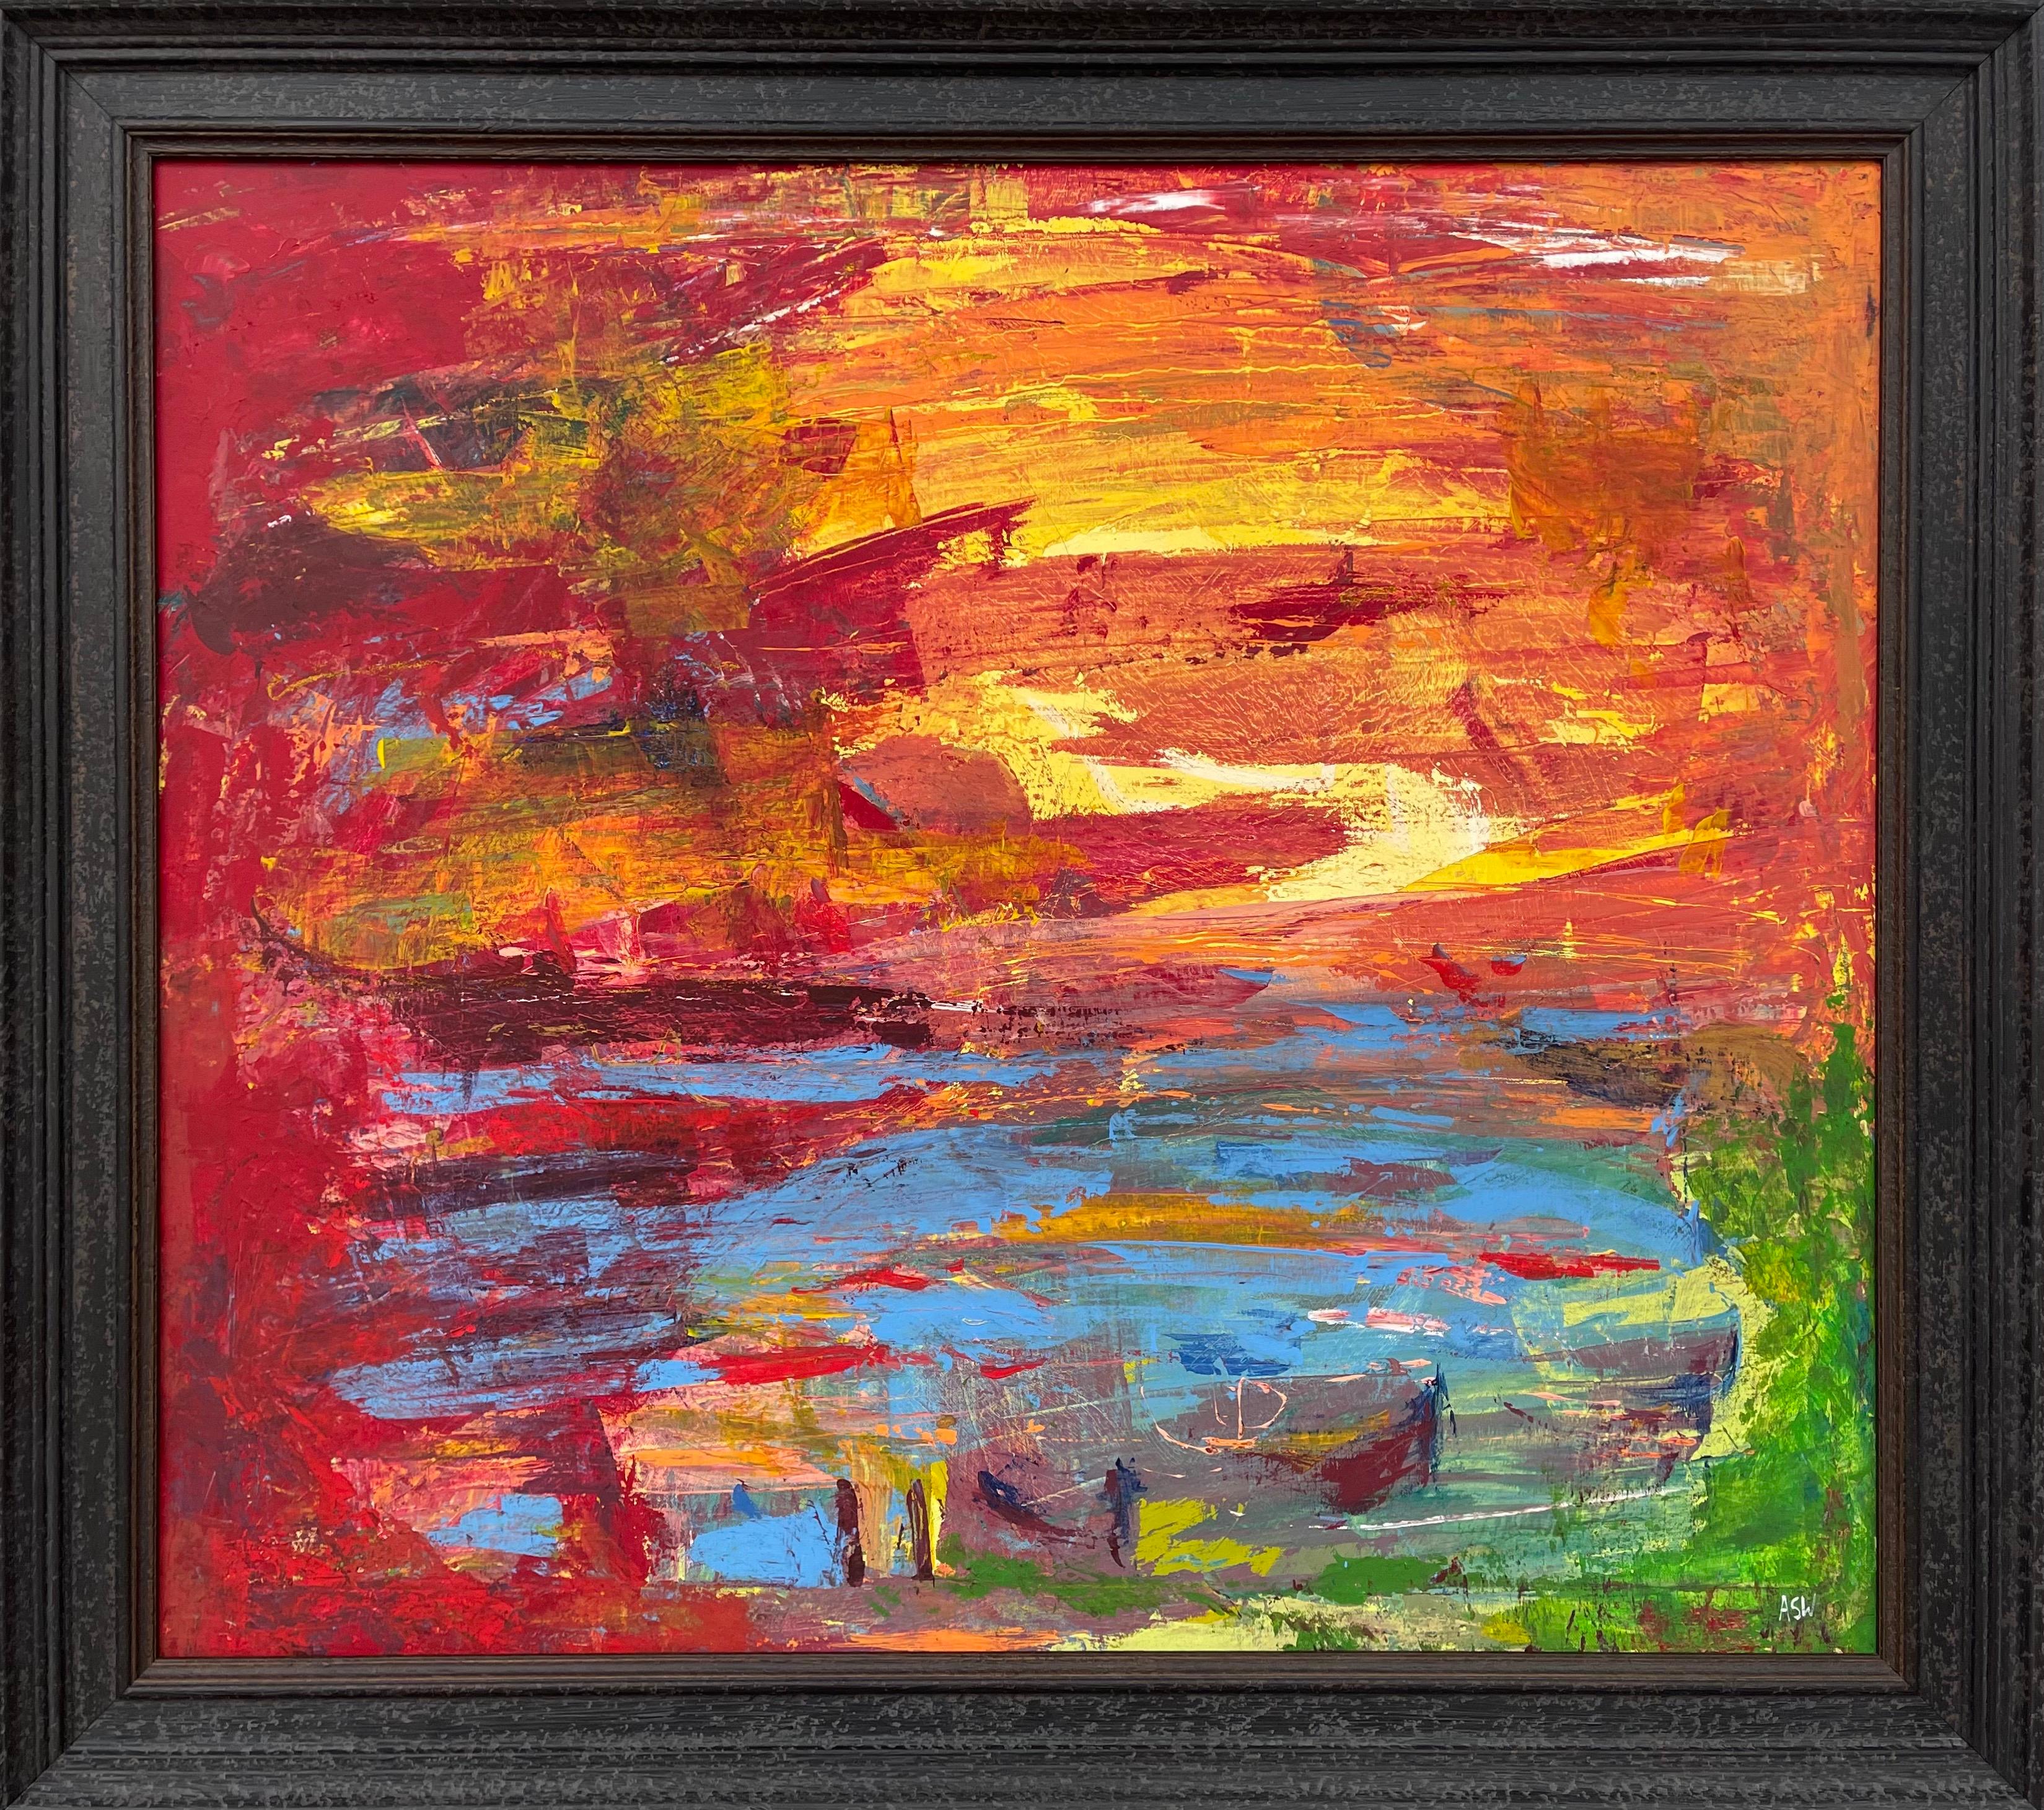 Abstract Blue Orange & Red Lake Sunset Landscape by Contemporary British Artist